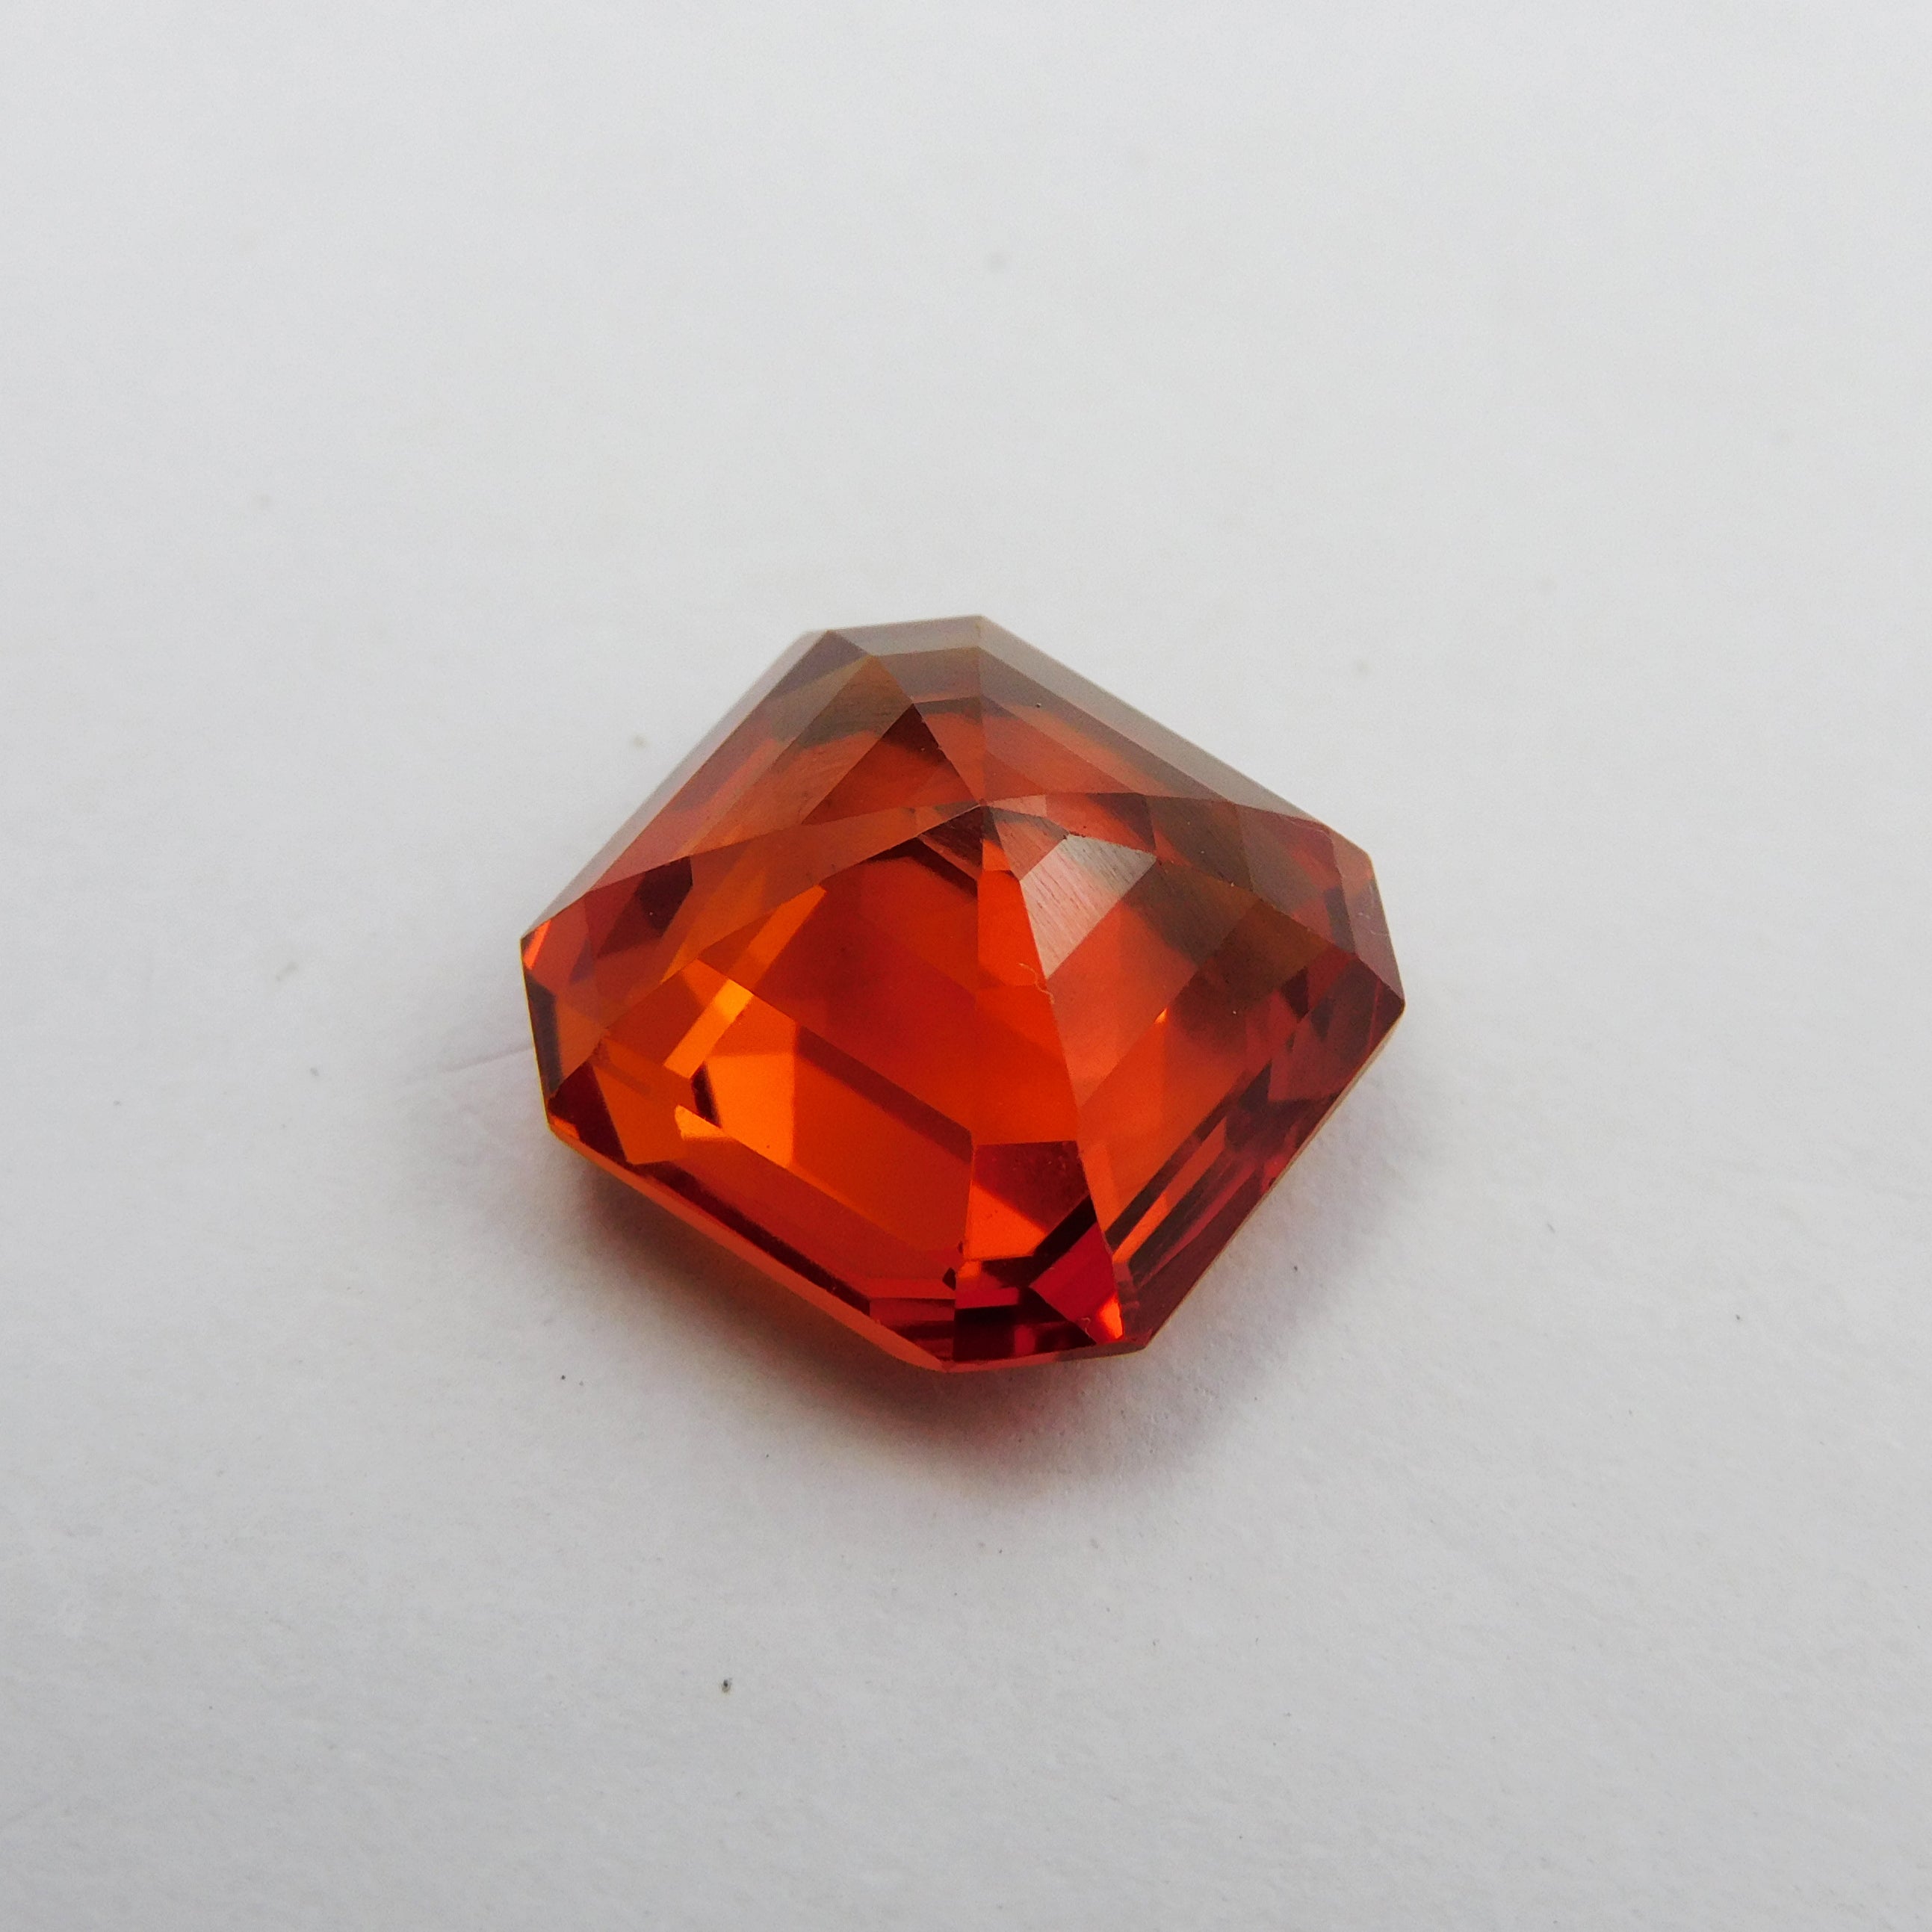 Ring Size Sapphire Gem ! Free Delivery Free Gift ! Certified Square Cut 8.45 Carat Orange Sapphire Natural Loose Gemstone